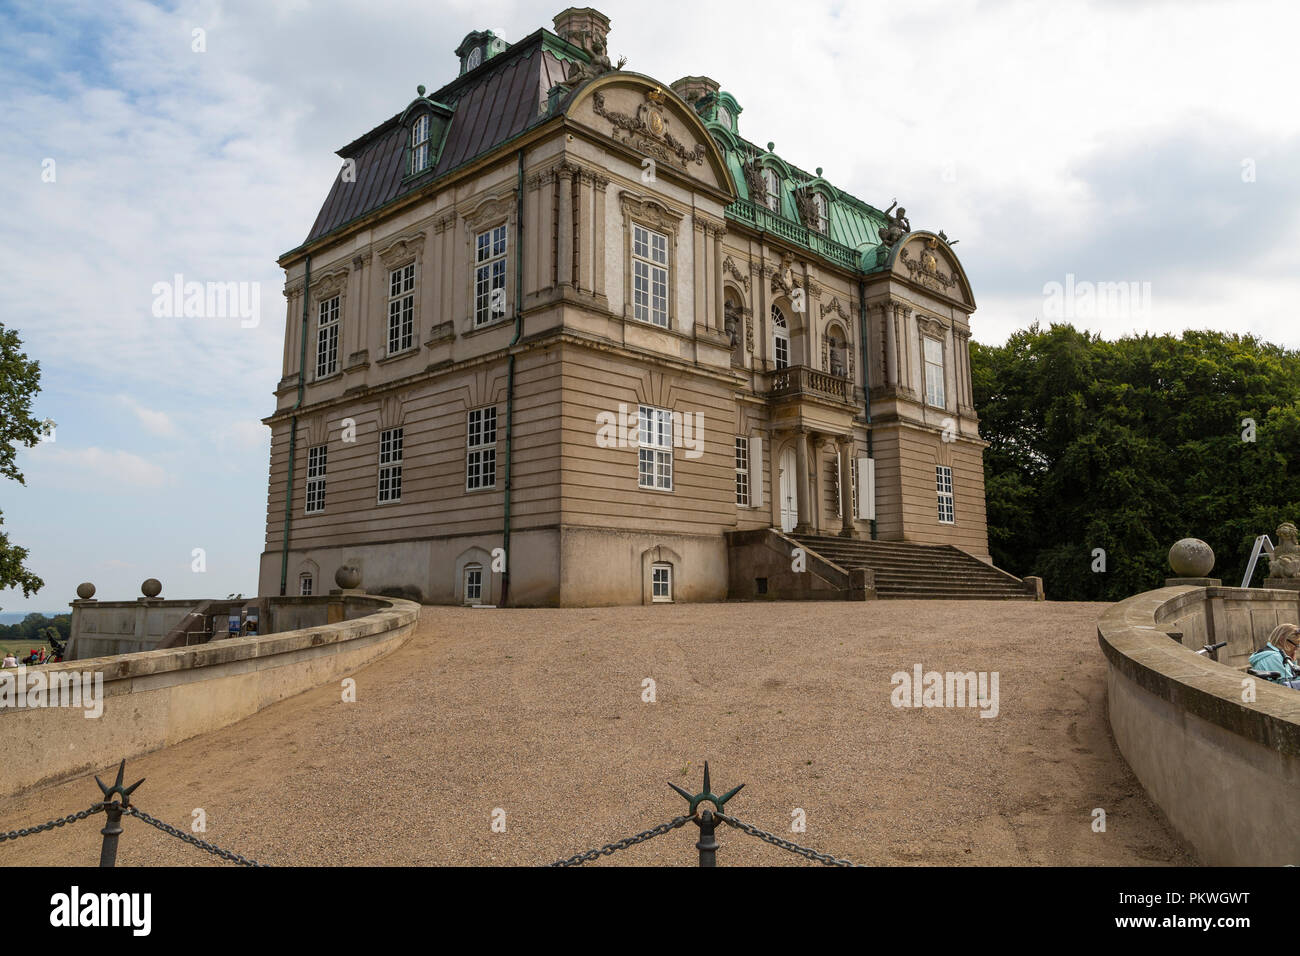 'Eremitagen'. Small palace in Jaegersborg Dyrehave north of Copenhagen, Denmark. Built 1734-36 by architect Lauritz de Thura for King Christian 6. The Stock Photo